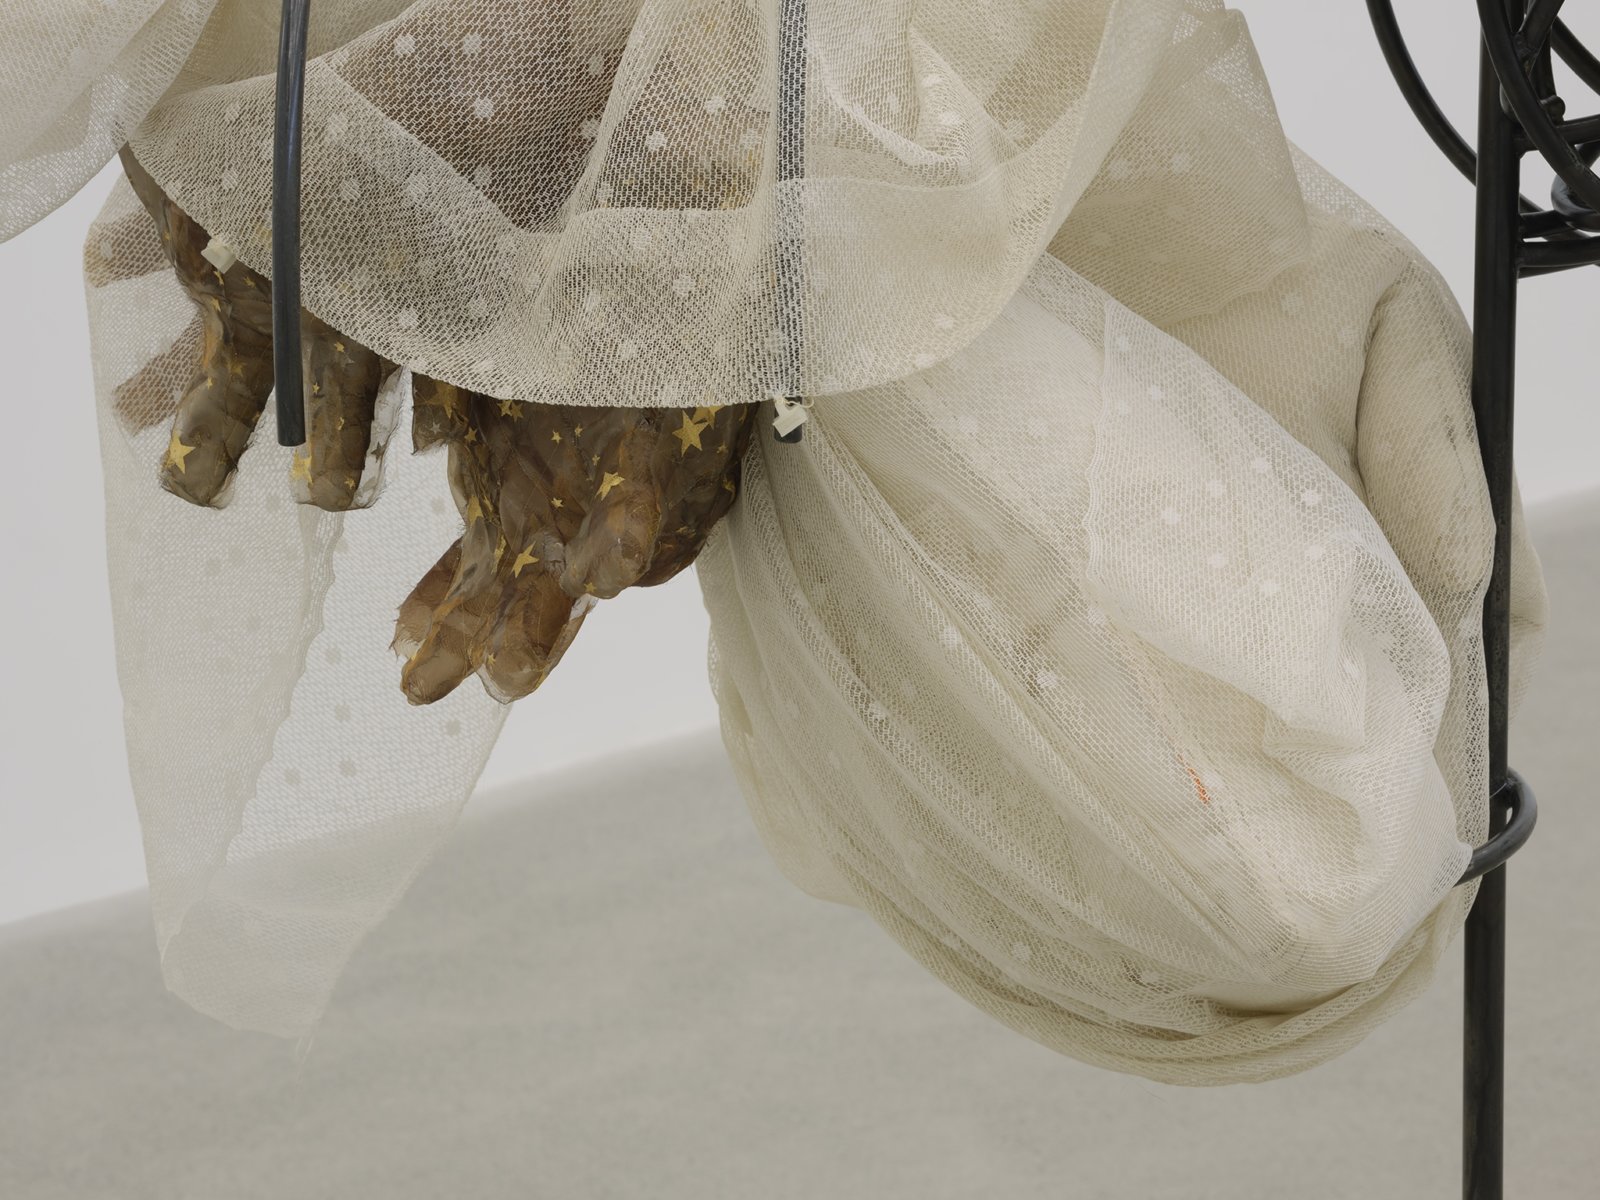 ​Rochelle Goldberg, Gatekeeper: And still it breathes within this body (detail), 2019, glazed ceramic, steel, curtain, polyester fabric, acrylic, pillow, 58 x 21 x 64 in. (146 x 52 x 163 cm) by Rochelle Goldberg